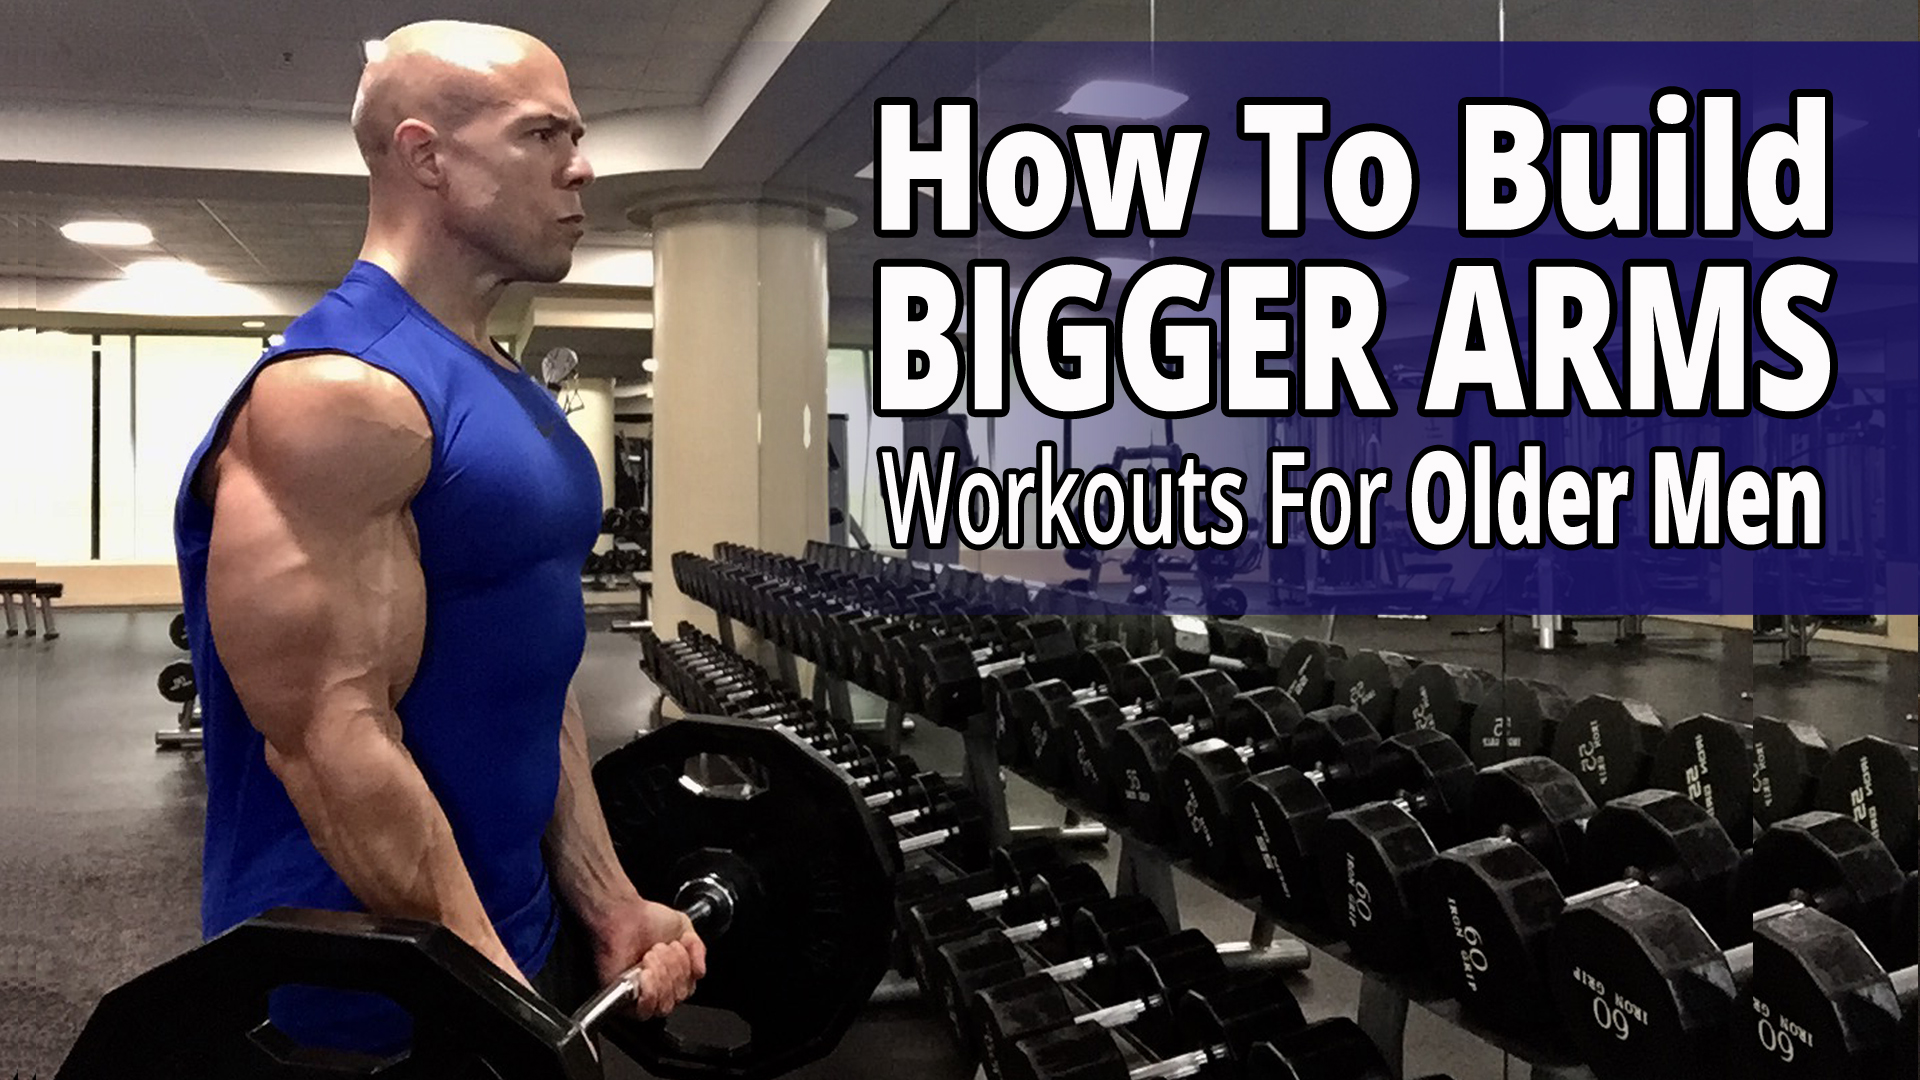 How To Build Bigger Arms - Workouts For Older Men - Biceps, Triceps